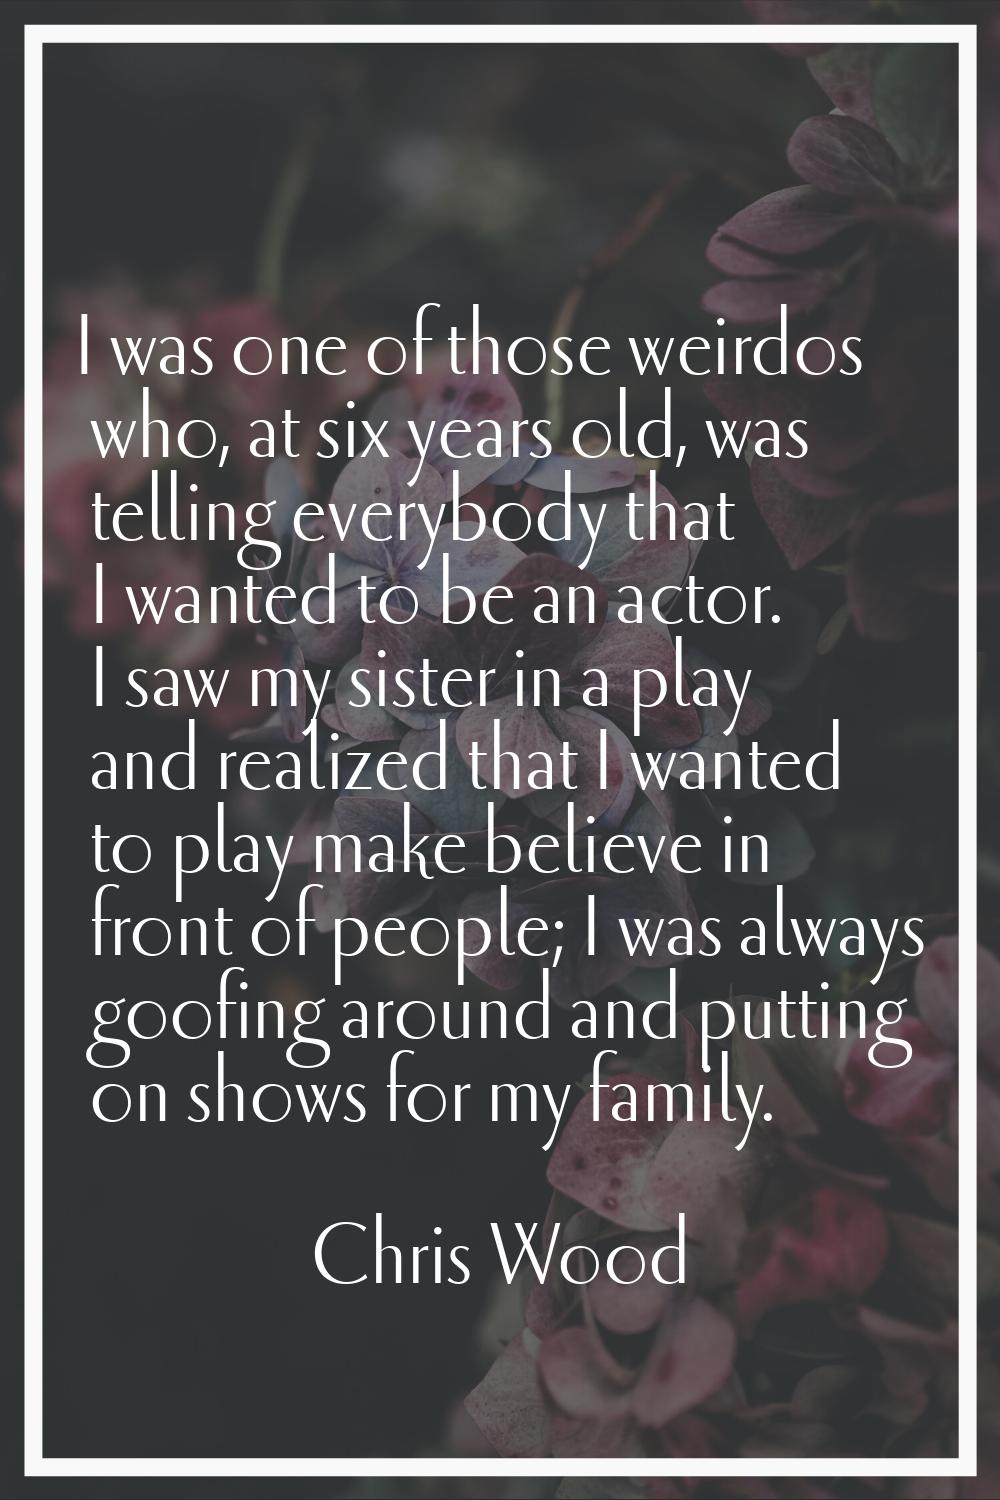 I was one of those weirdos who, at six years old, was telling everybody that I wanted to be an acto